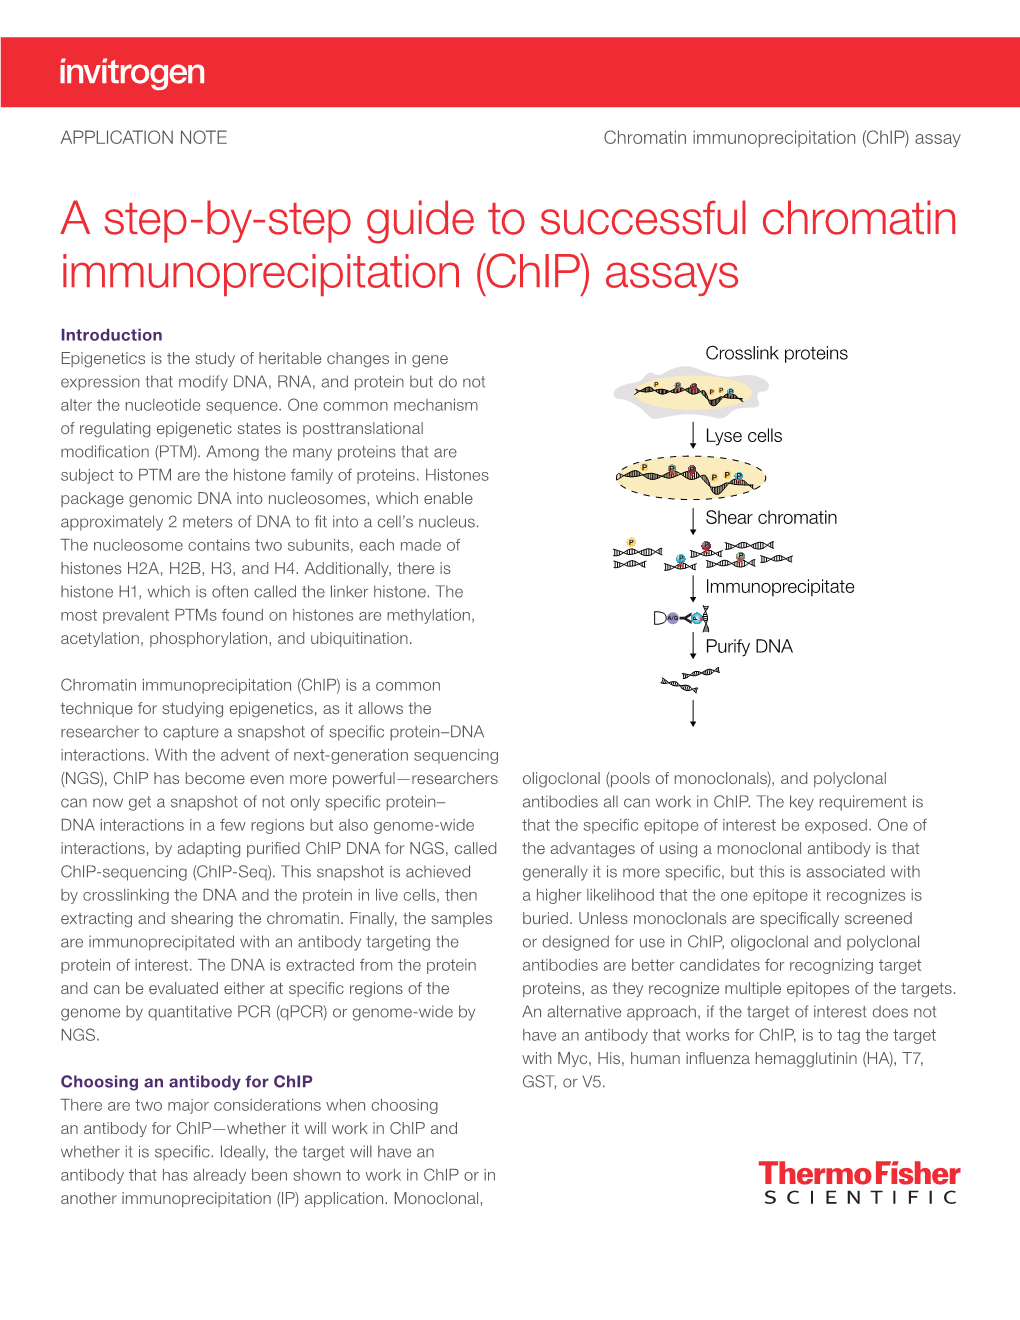 A Step-By-Step Guide to Successful Chromatin Immunoprecipitation (Chip) Assays